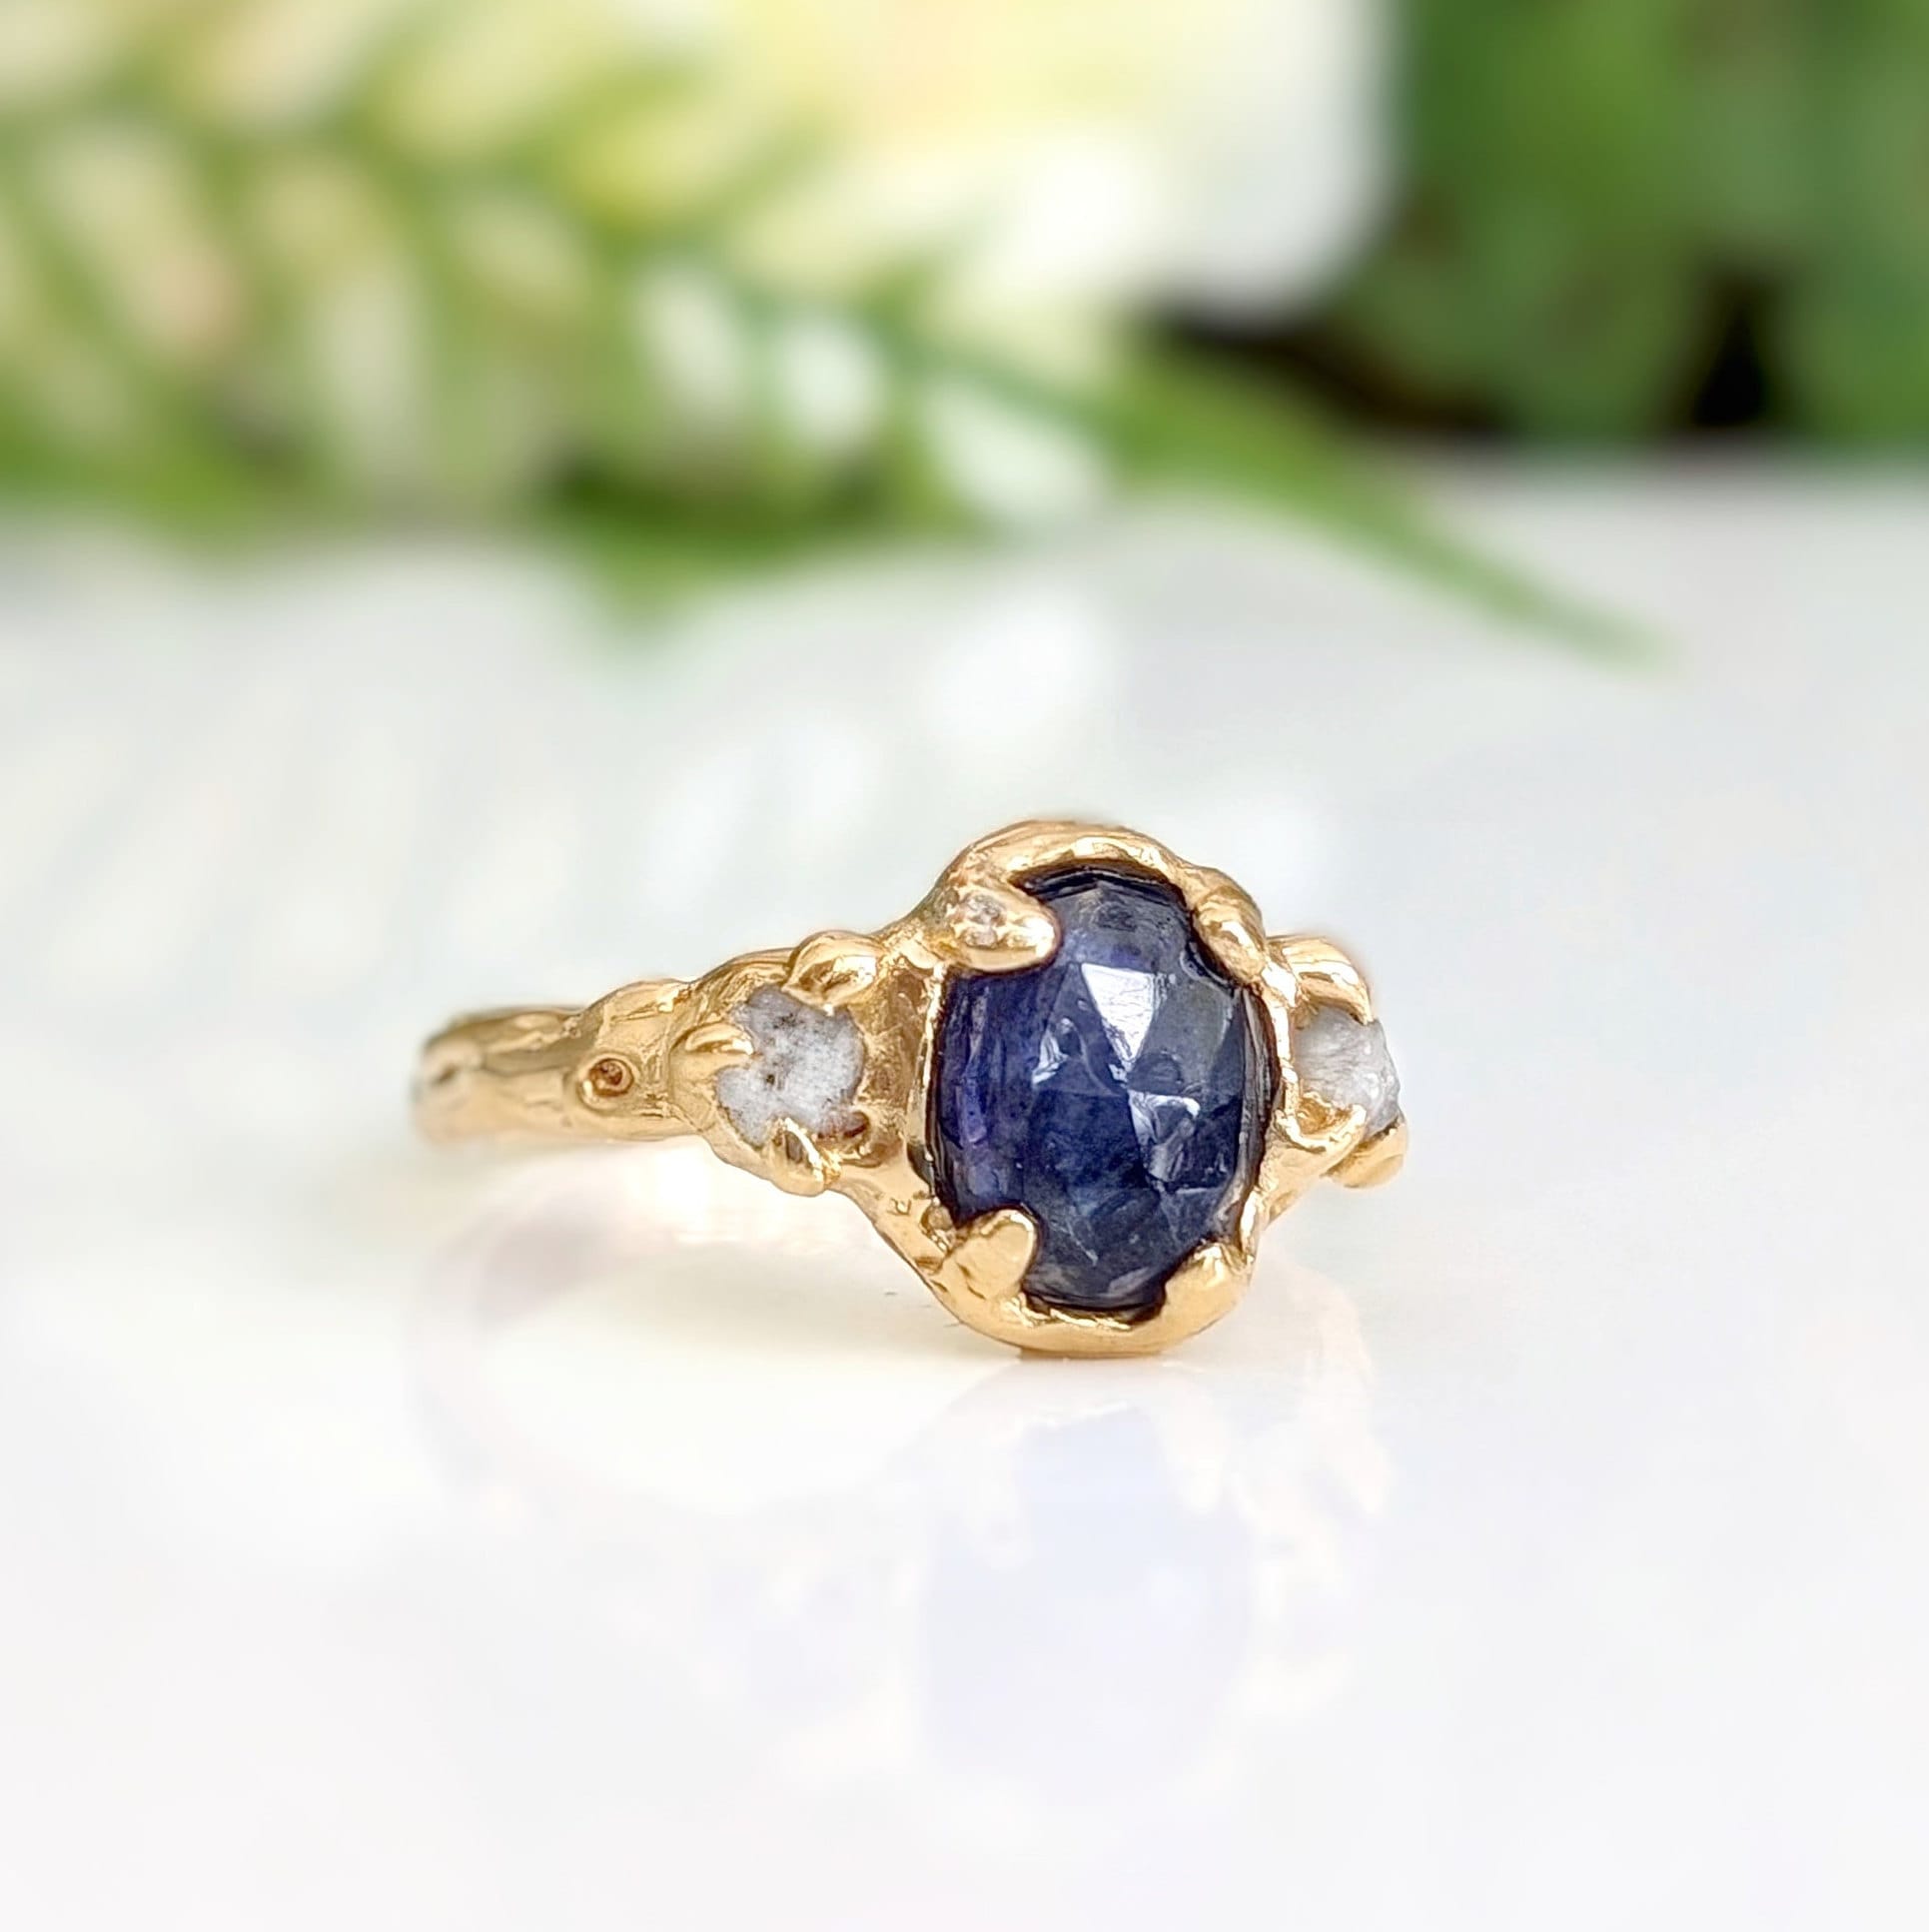 Oval Blue Sapphire and 2 small raw diamonds set by prongs on a textured Molten Solid 14k Gold band